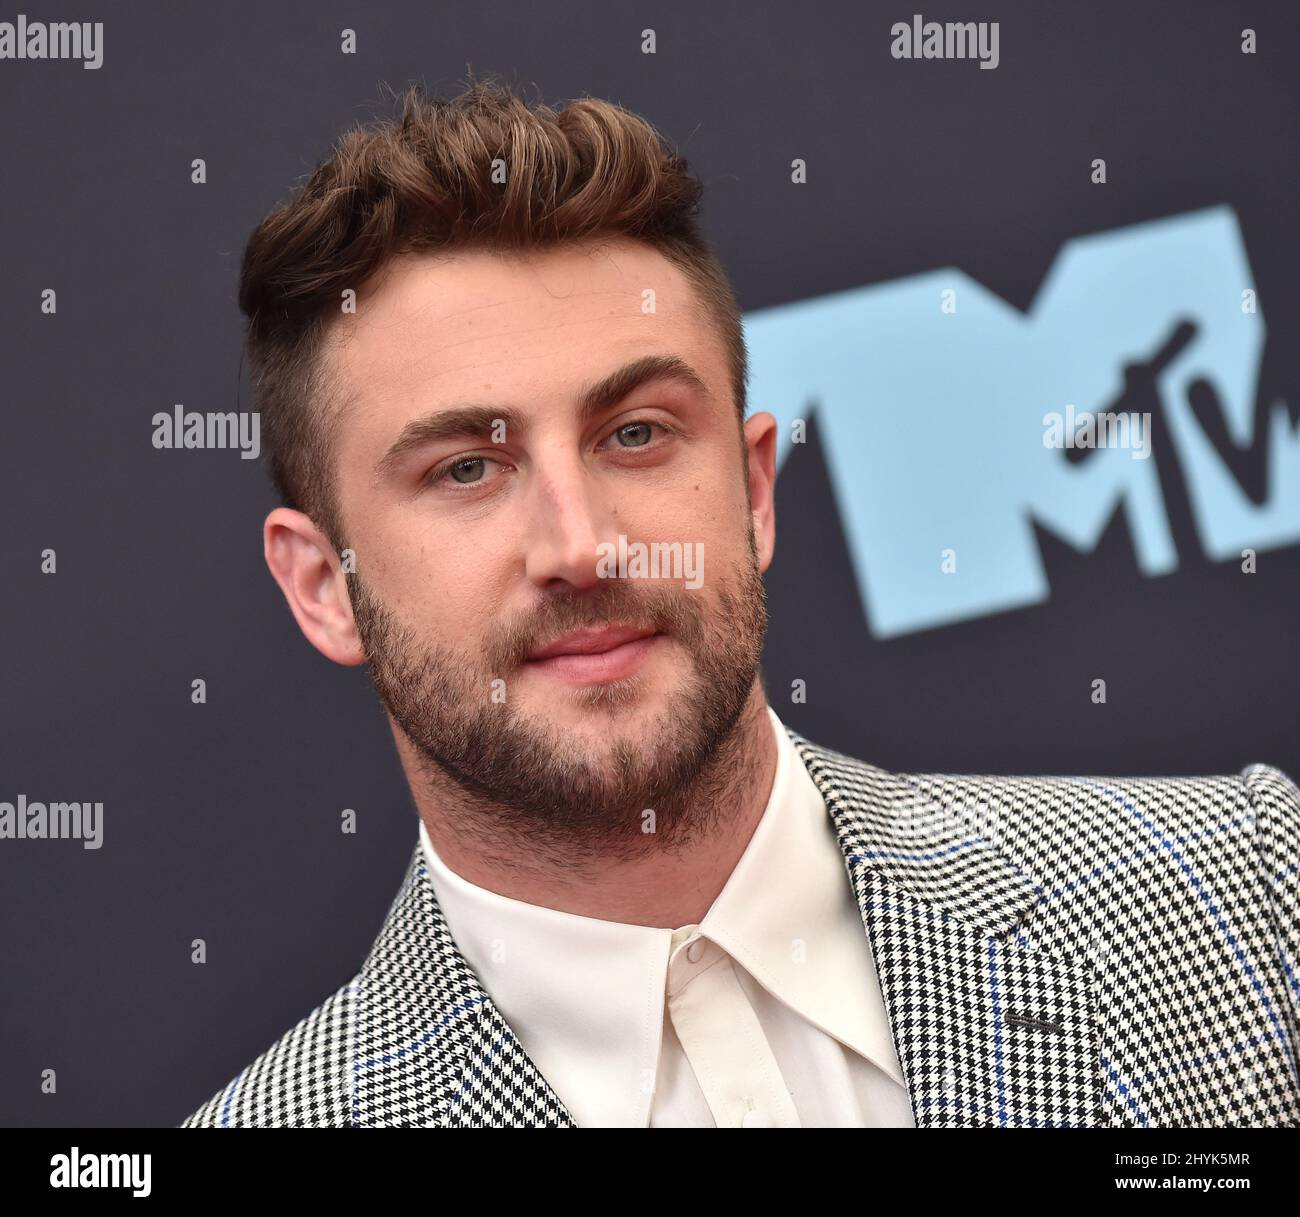 Jordan McGraw at the 2019 MTV Video Music Awards held at the Prudential ...